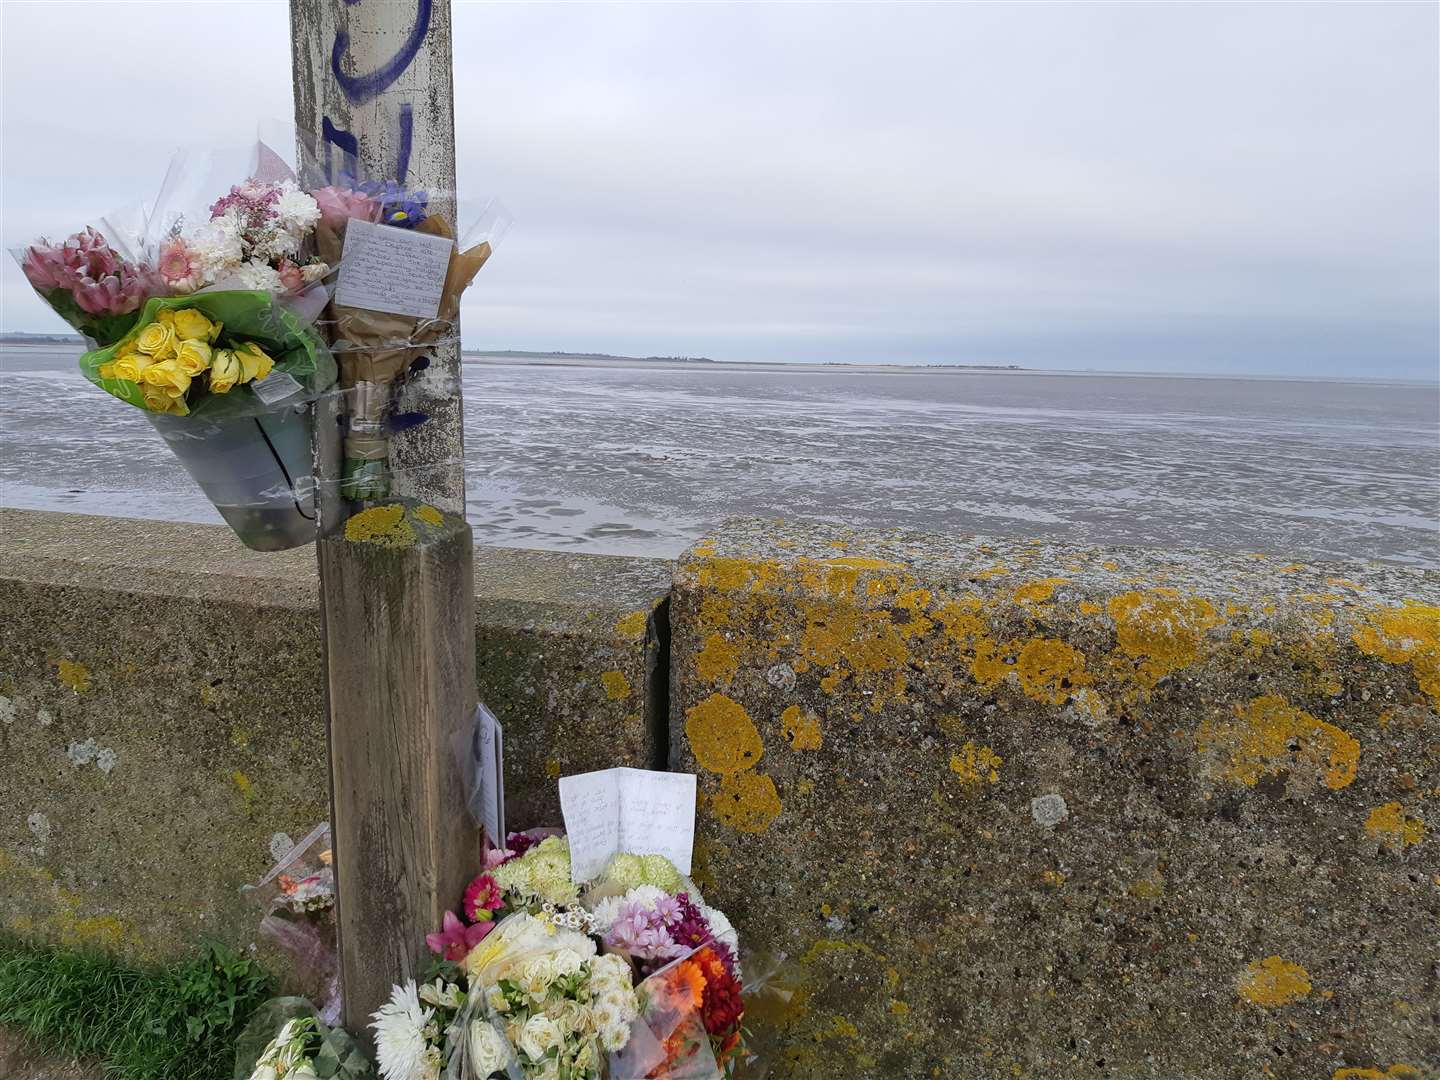 Tributes to Mrs Harrison were left at the scene